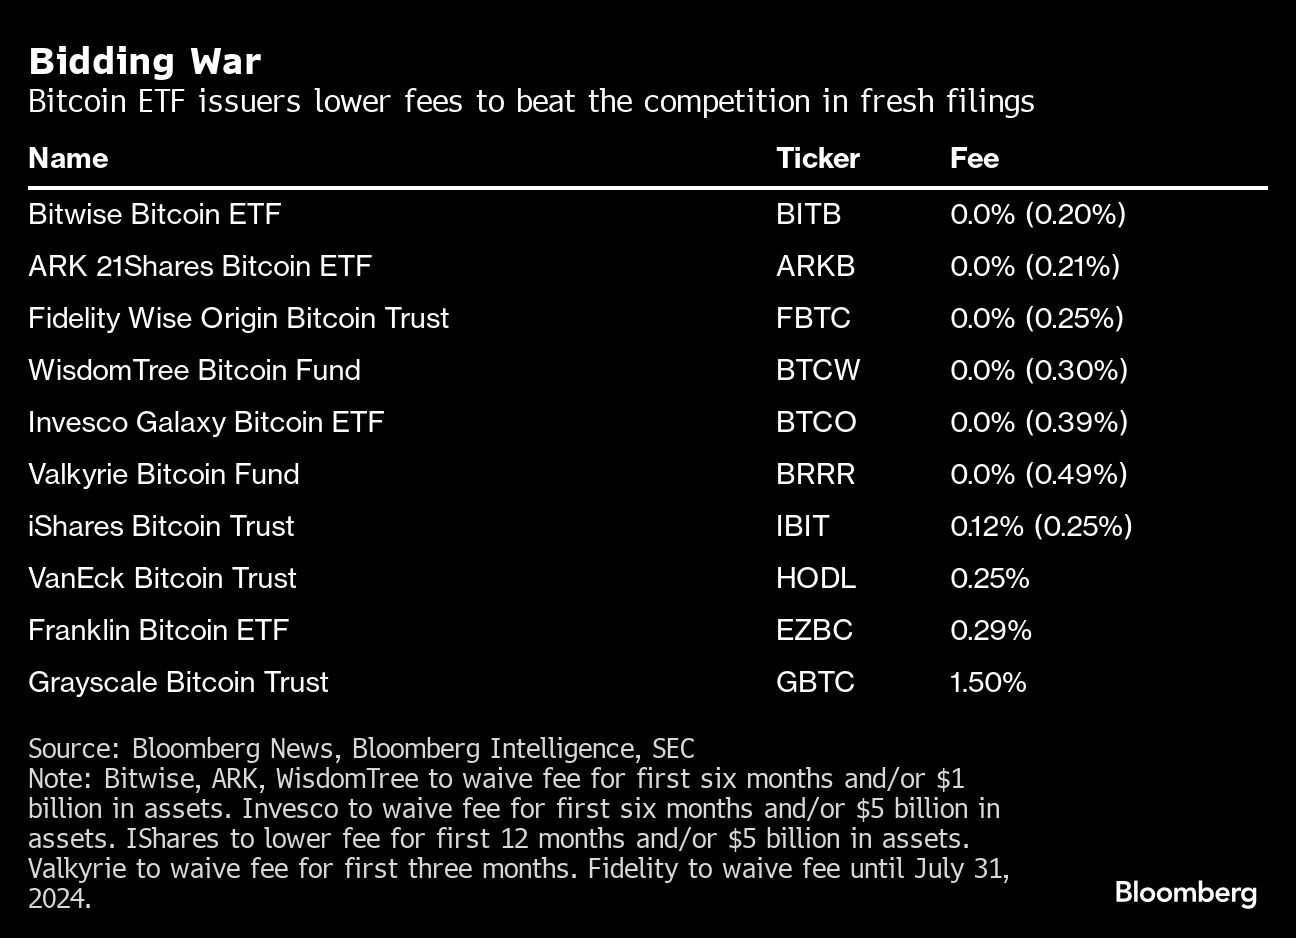 Bidding War | Bitcoin ETF issuers lower fees to beat the competition in fresh filings (updated Jan. 10, 2024)